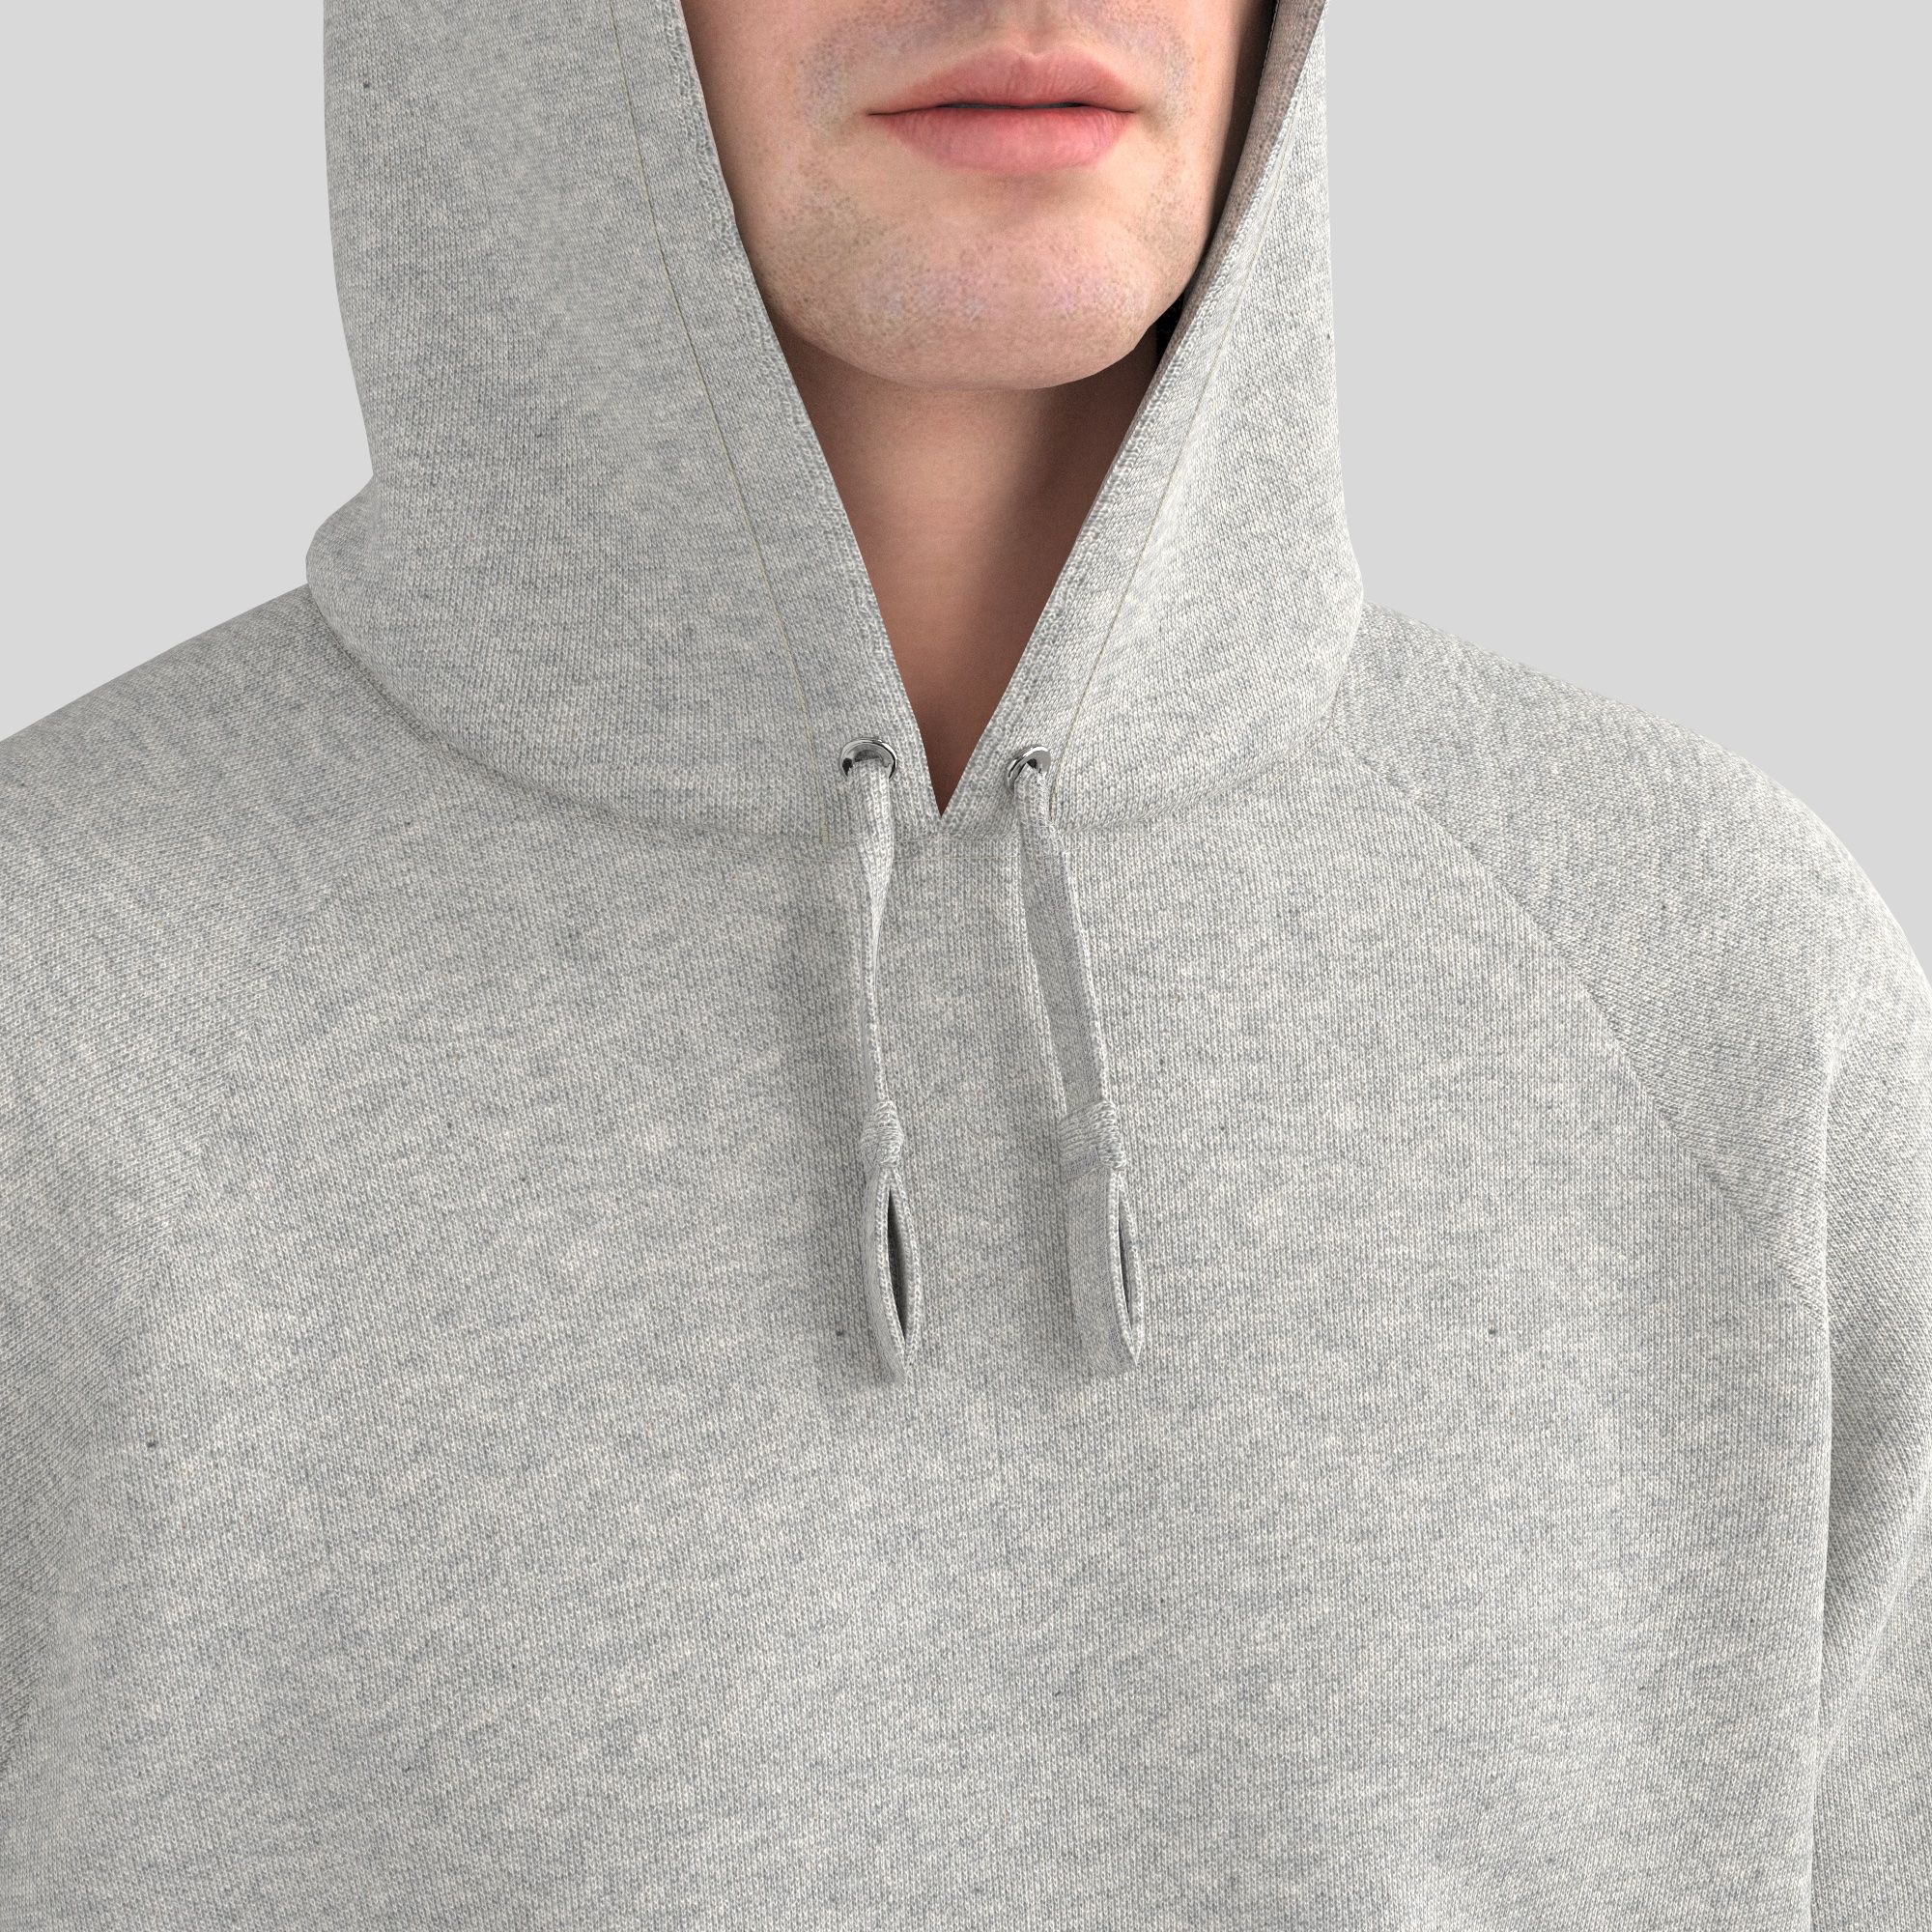 Organic Sweat-shirt in 100% coton Gots certified Transparent & ethical French manufacturing by Philipp Gaber